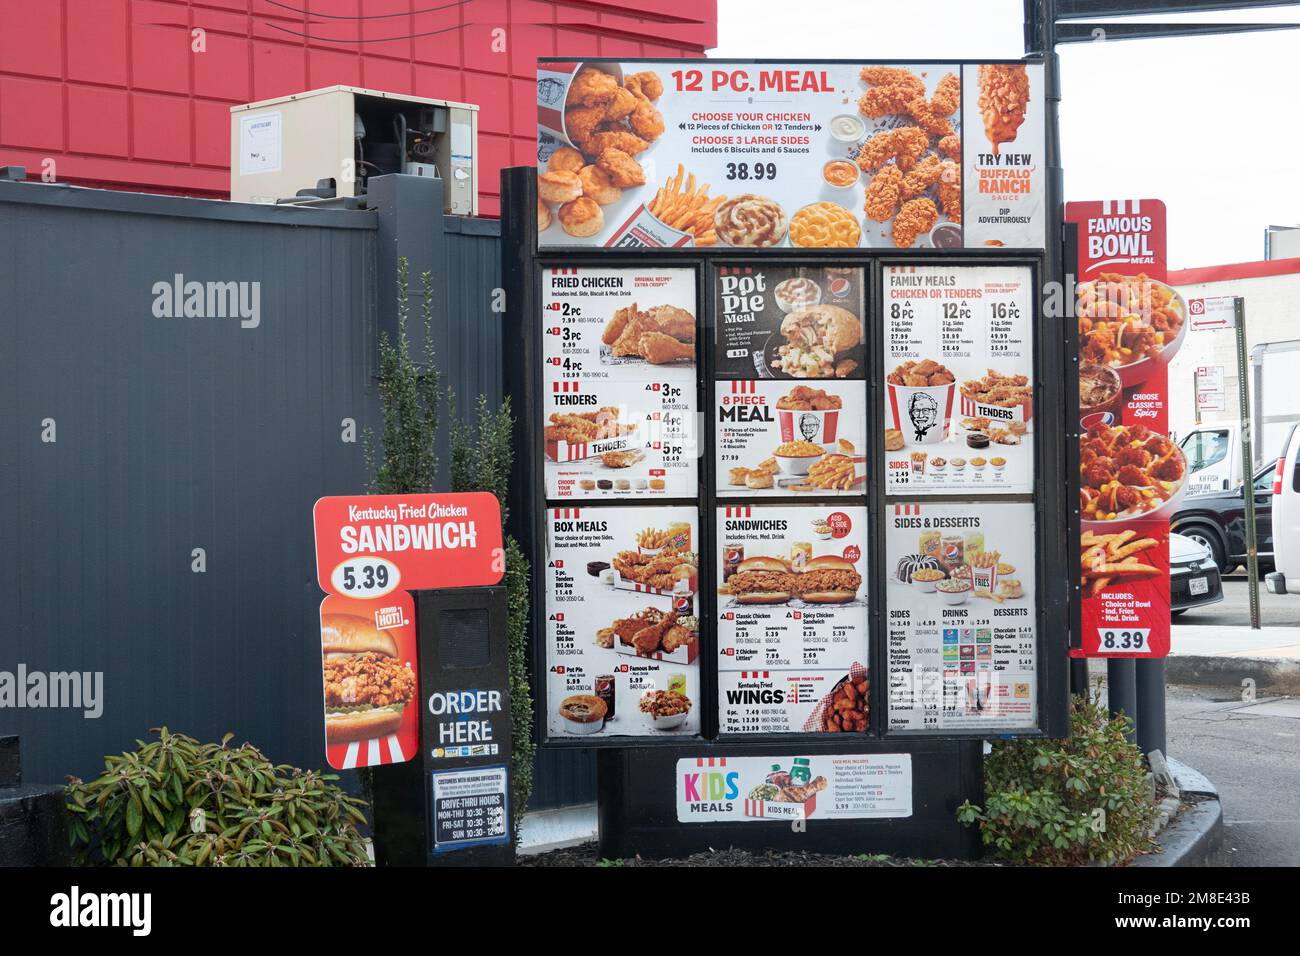 The drive through menu at a KFC, Kentucky Fried Chicken, restaurant on Northern Blvd in Flushing, Queens, New York City. Stock Photo